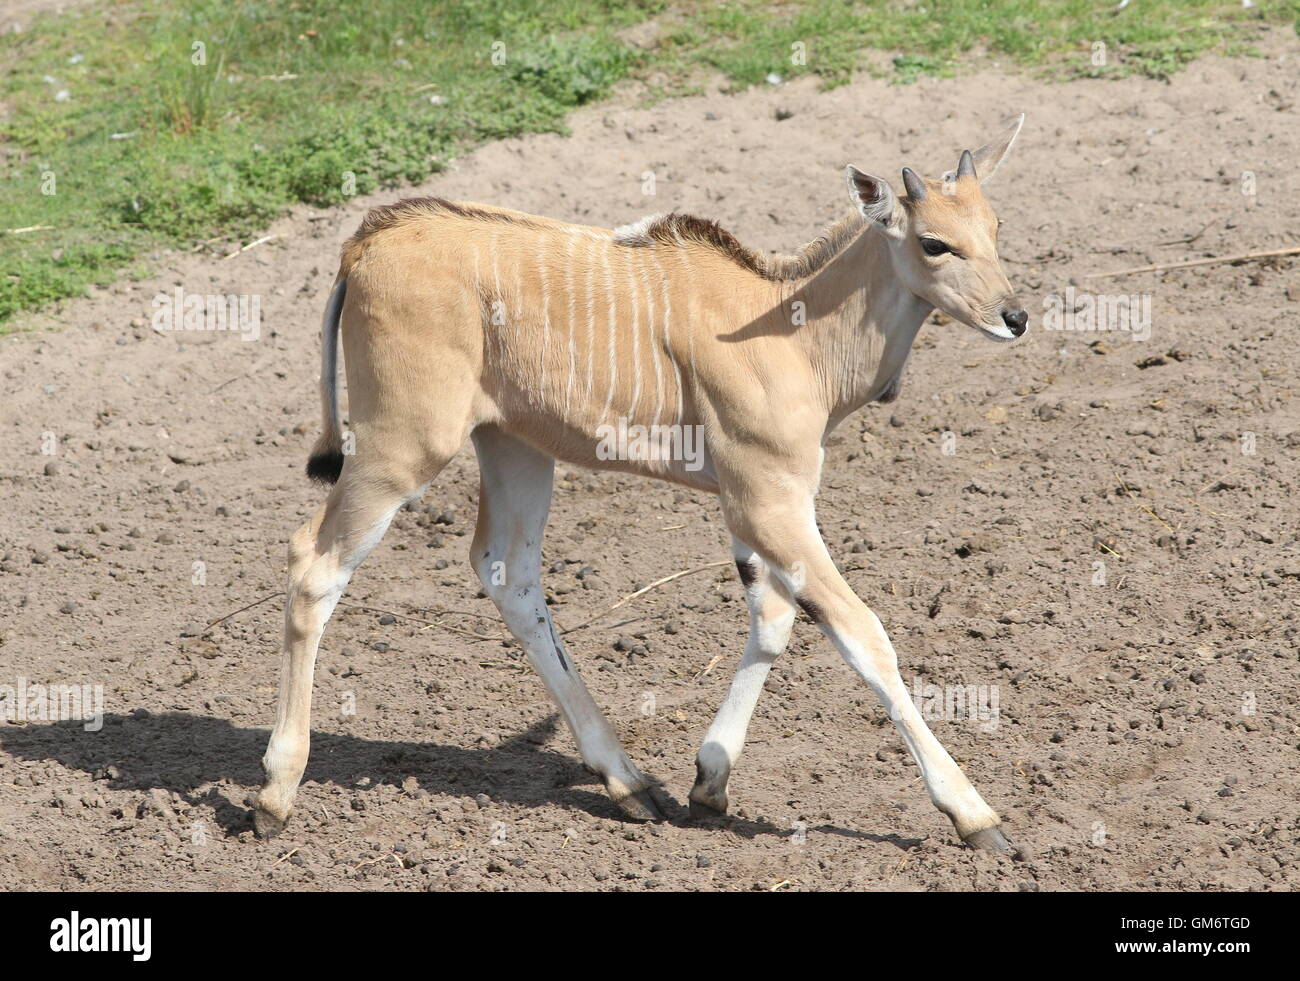 Juvenile African Southern or Common Eland antelope (Taurotragus oryx) Stock Photo